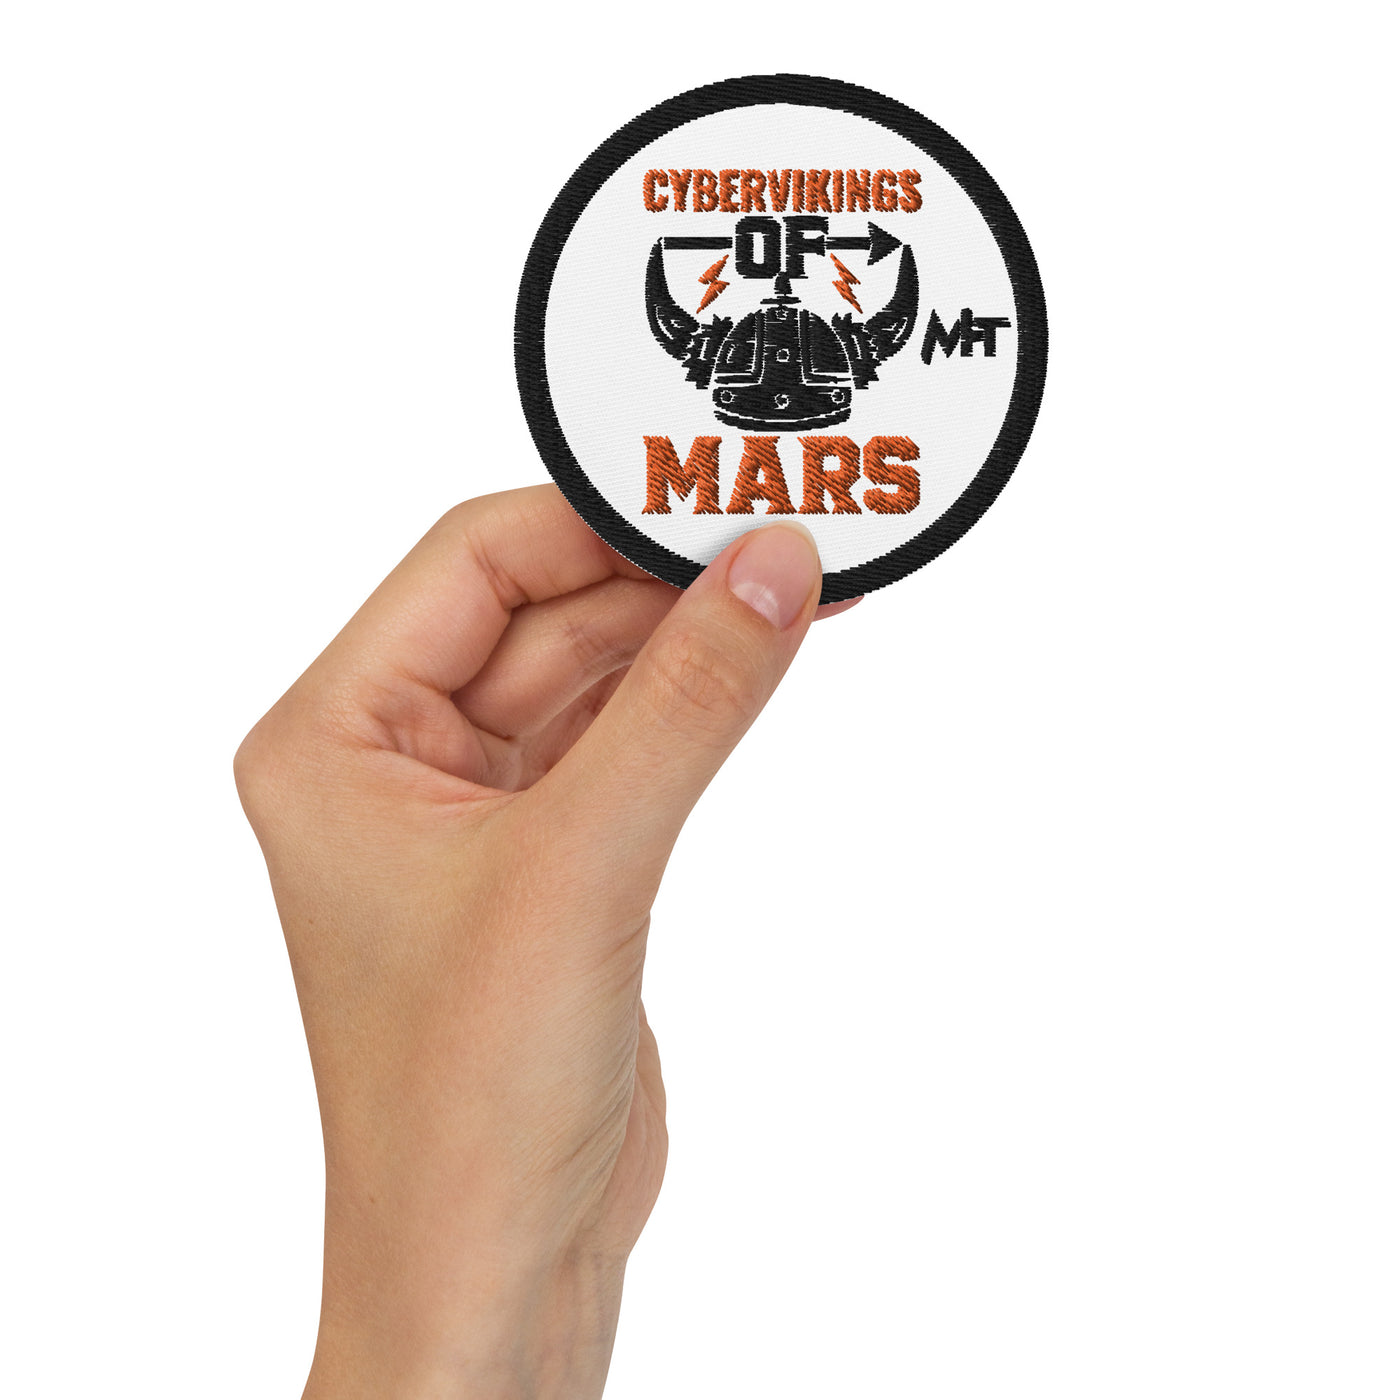 Cyberviking of Mars - Embroidered patches